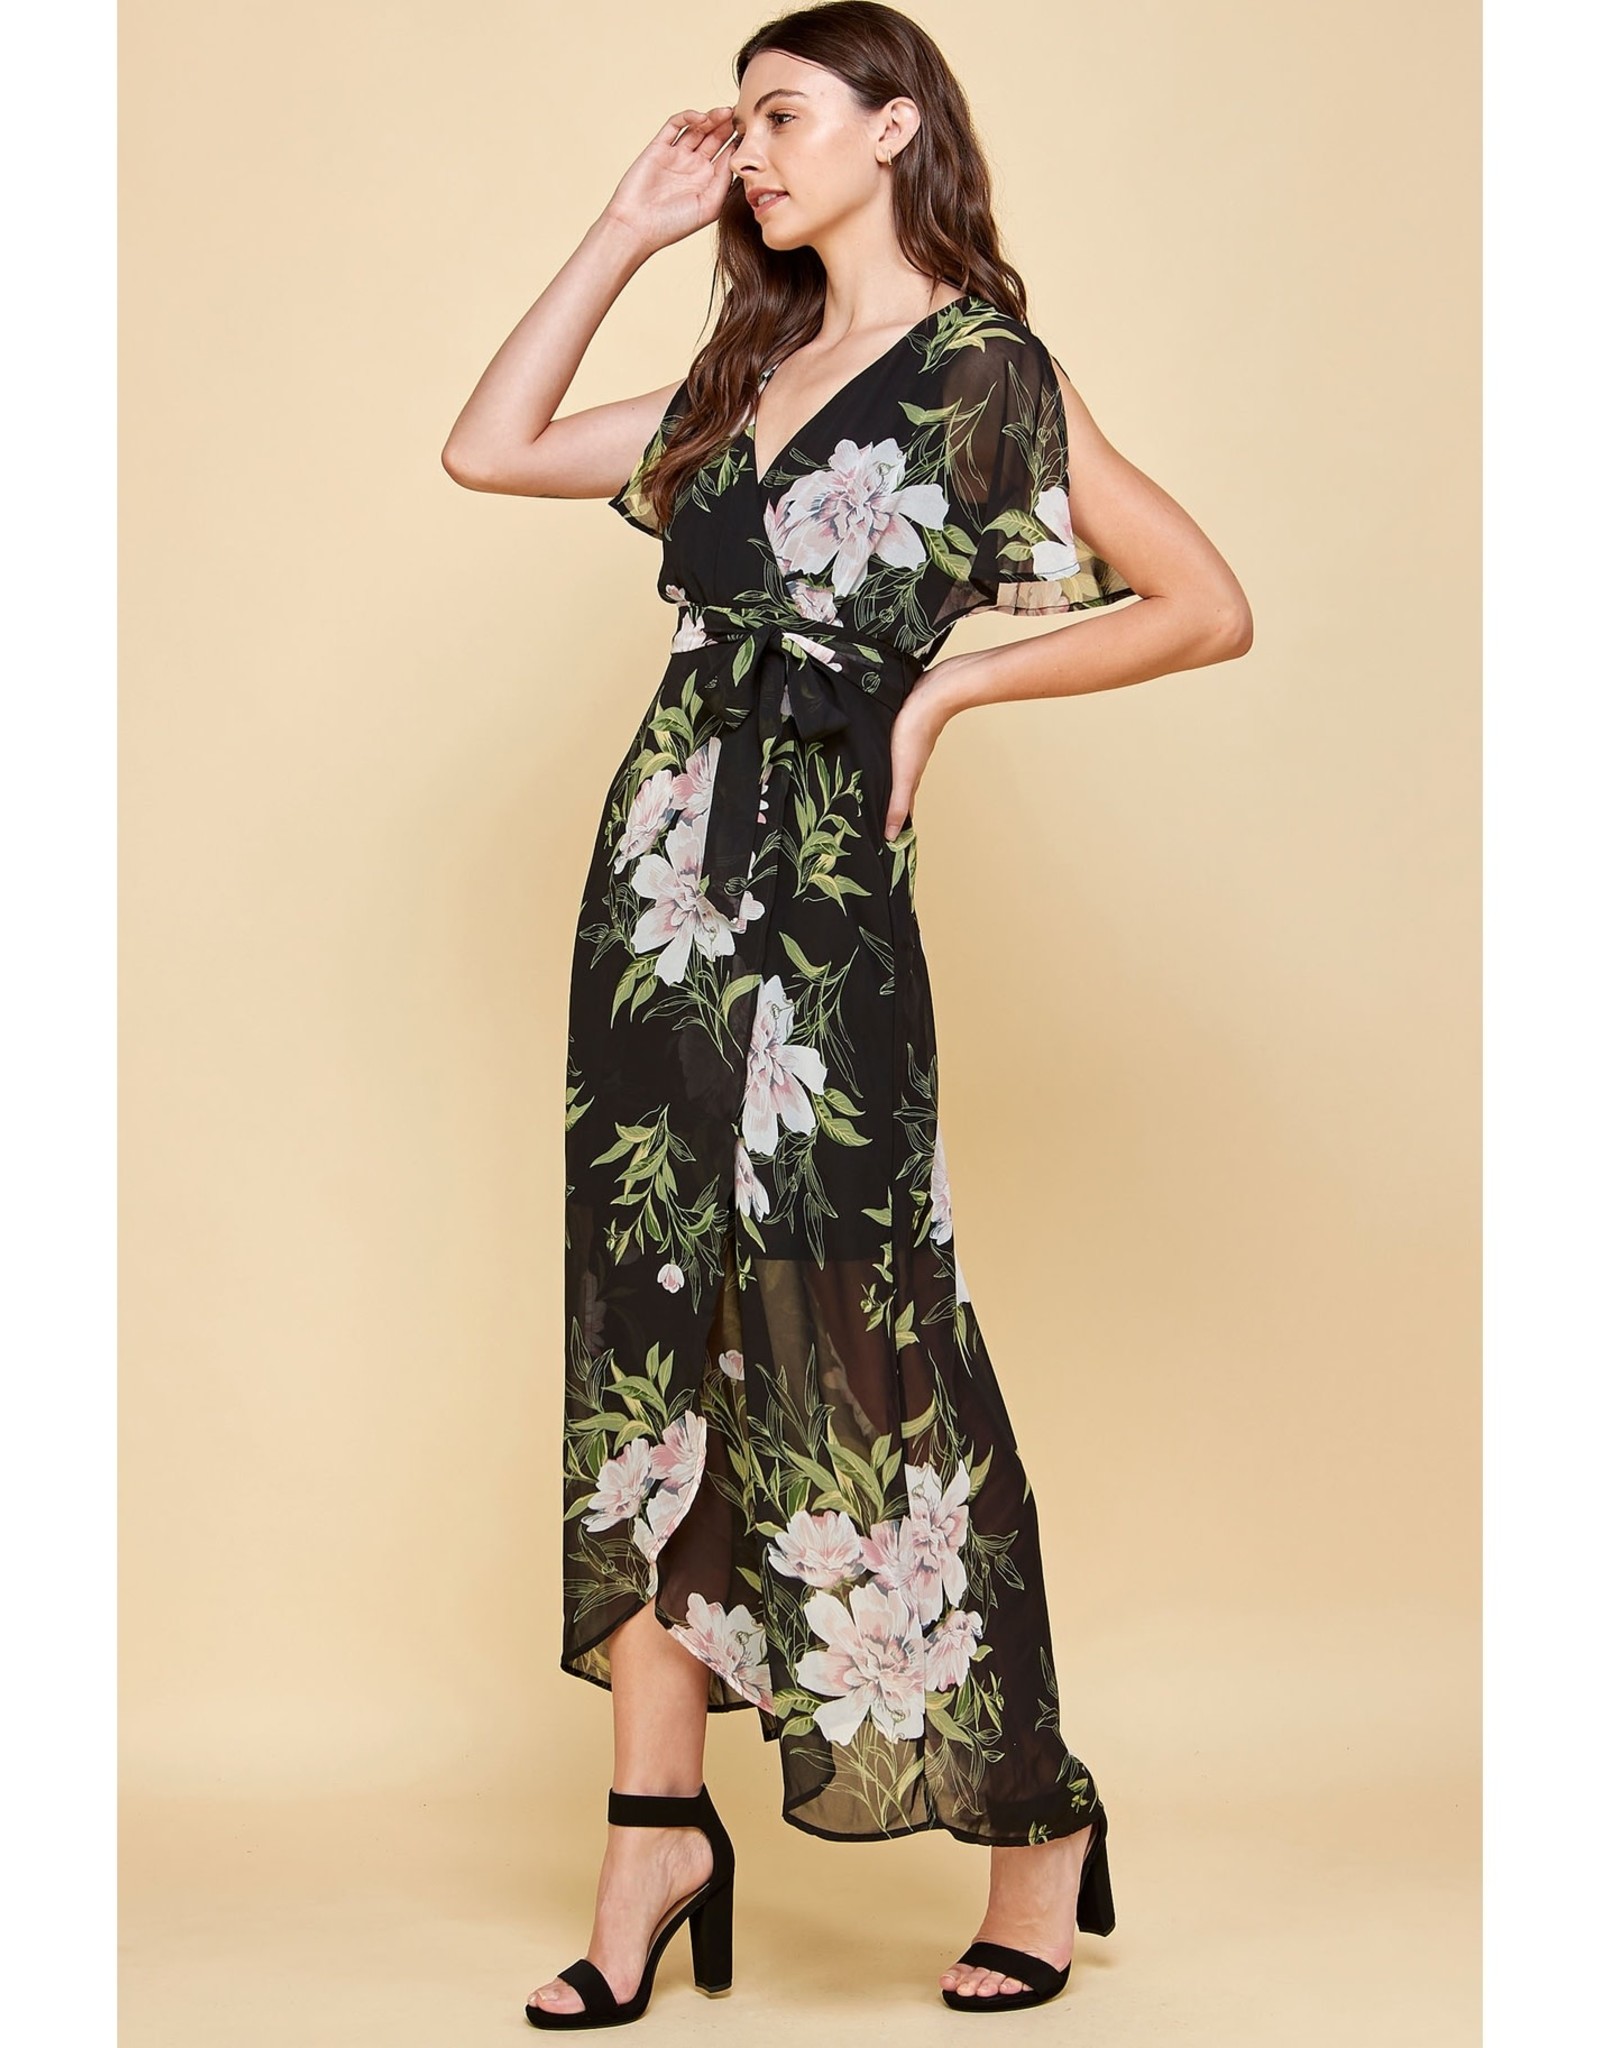 Floral High Low Maxi